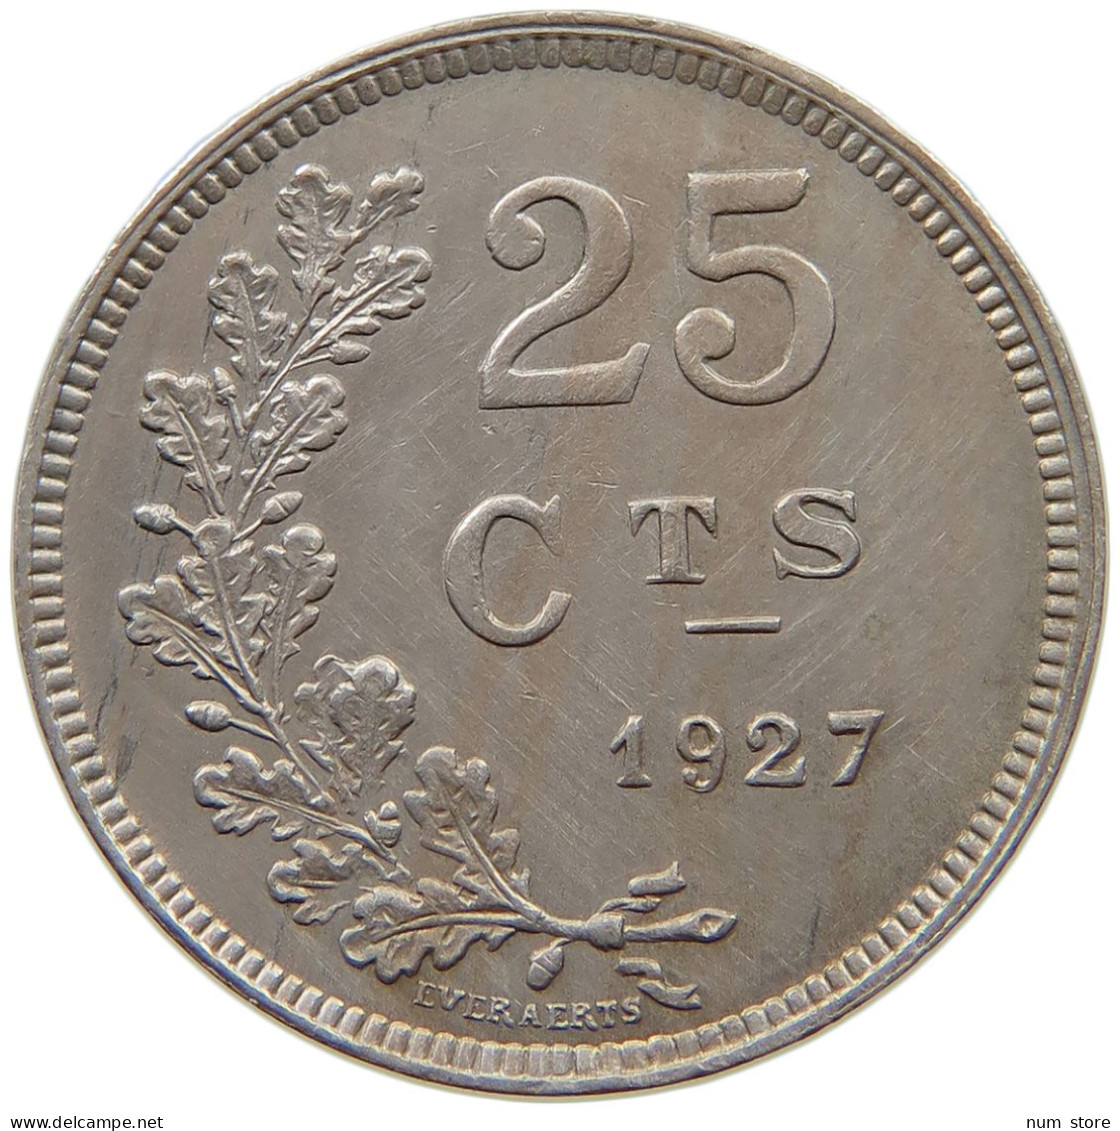 LUXEMBOURG 25 CENTIMES 1927 Charlotte (1919-1964) #c065 0267 - Luxembourg